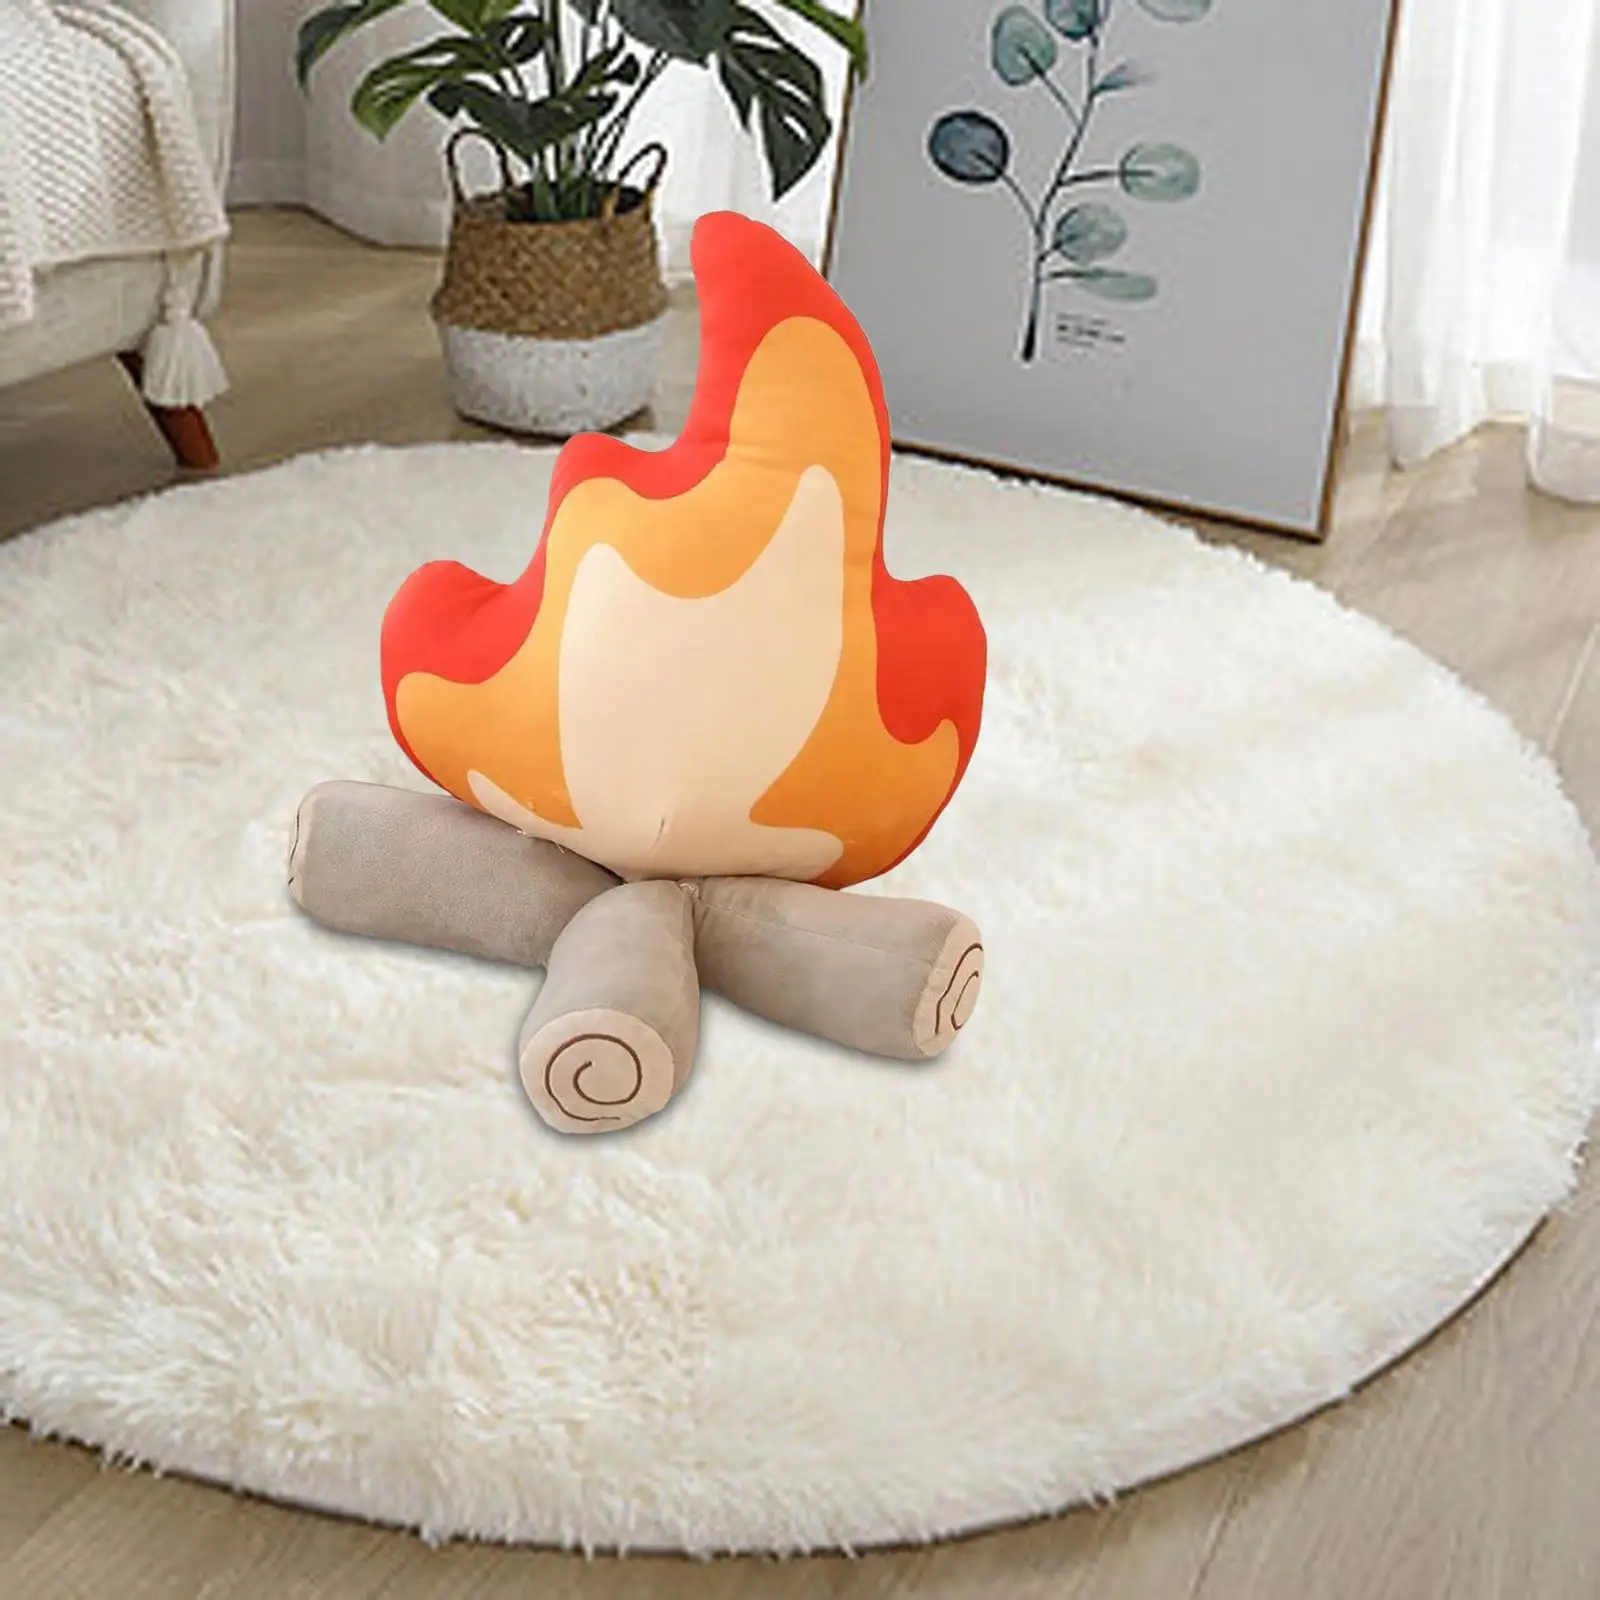 Funny Plush Toy Realistic Soft Plush Doll Needfire Plush Toy Flame Pillow Stuffed Doll for Bedroom Office Home Living Room Gifts